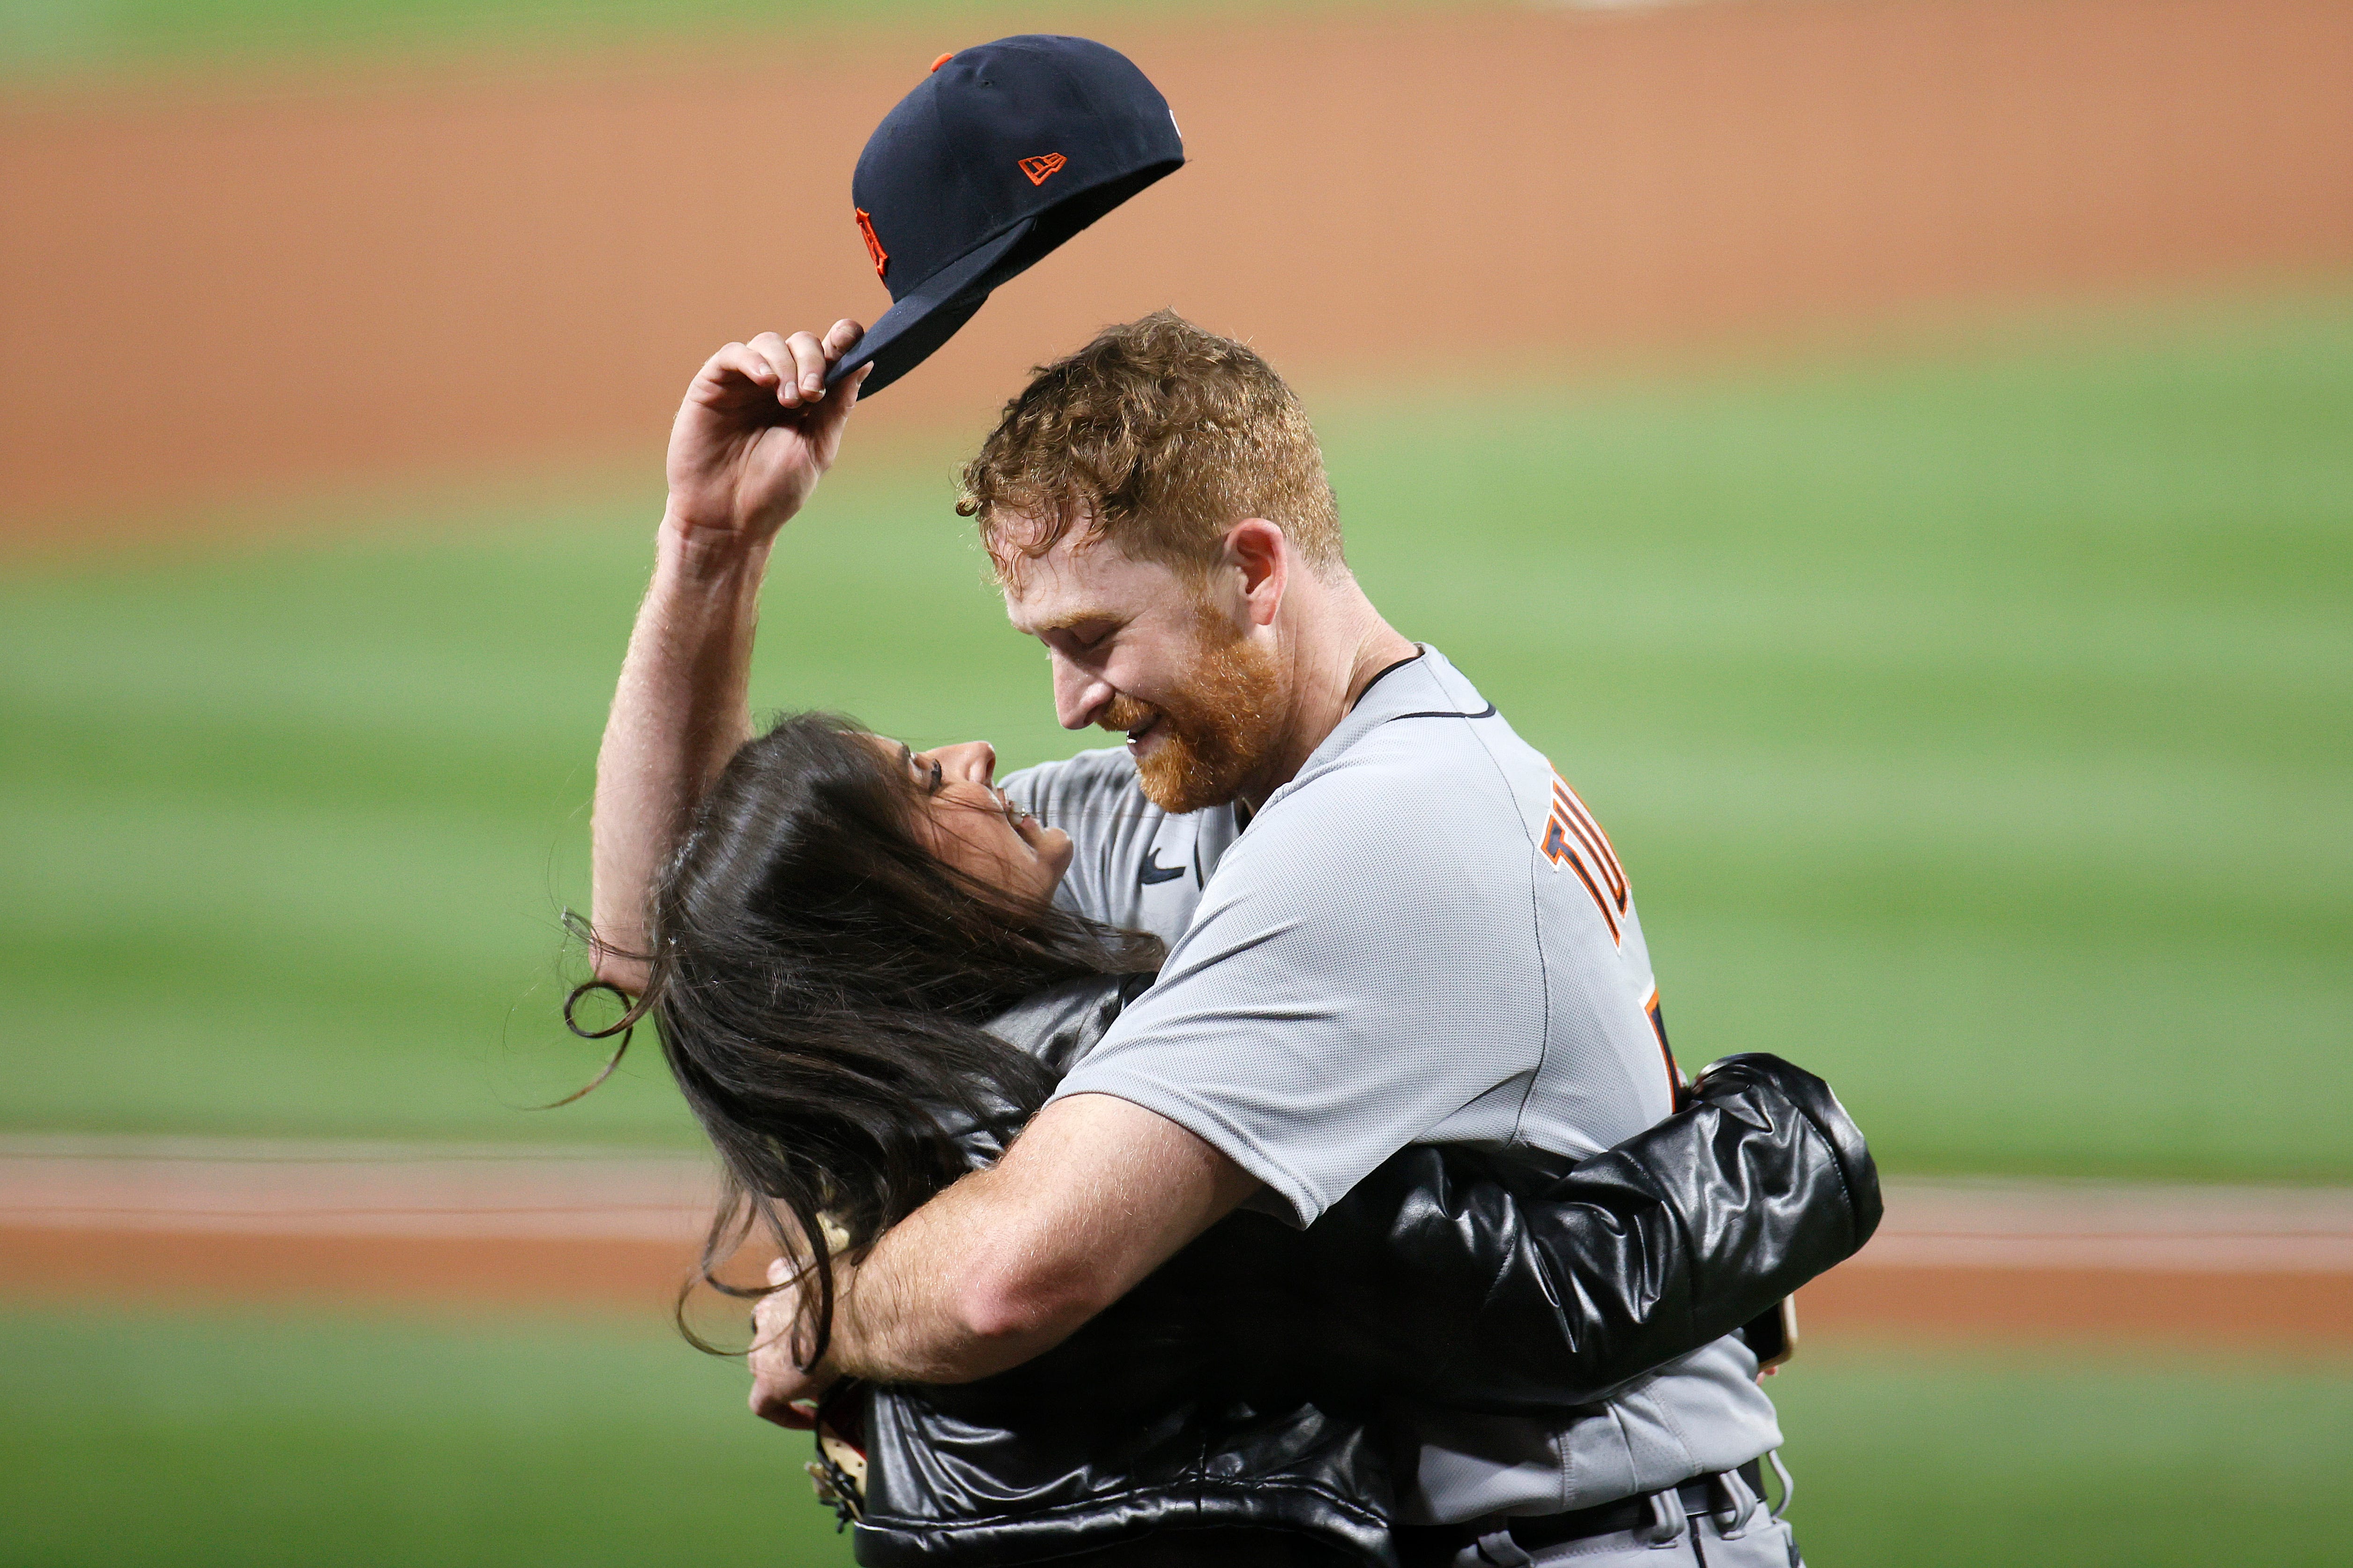 Spencer Turnbull of the Detroit Tigers celebrates with his girlfriend after his no-hitter.